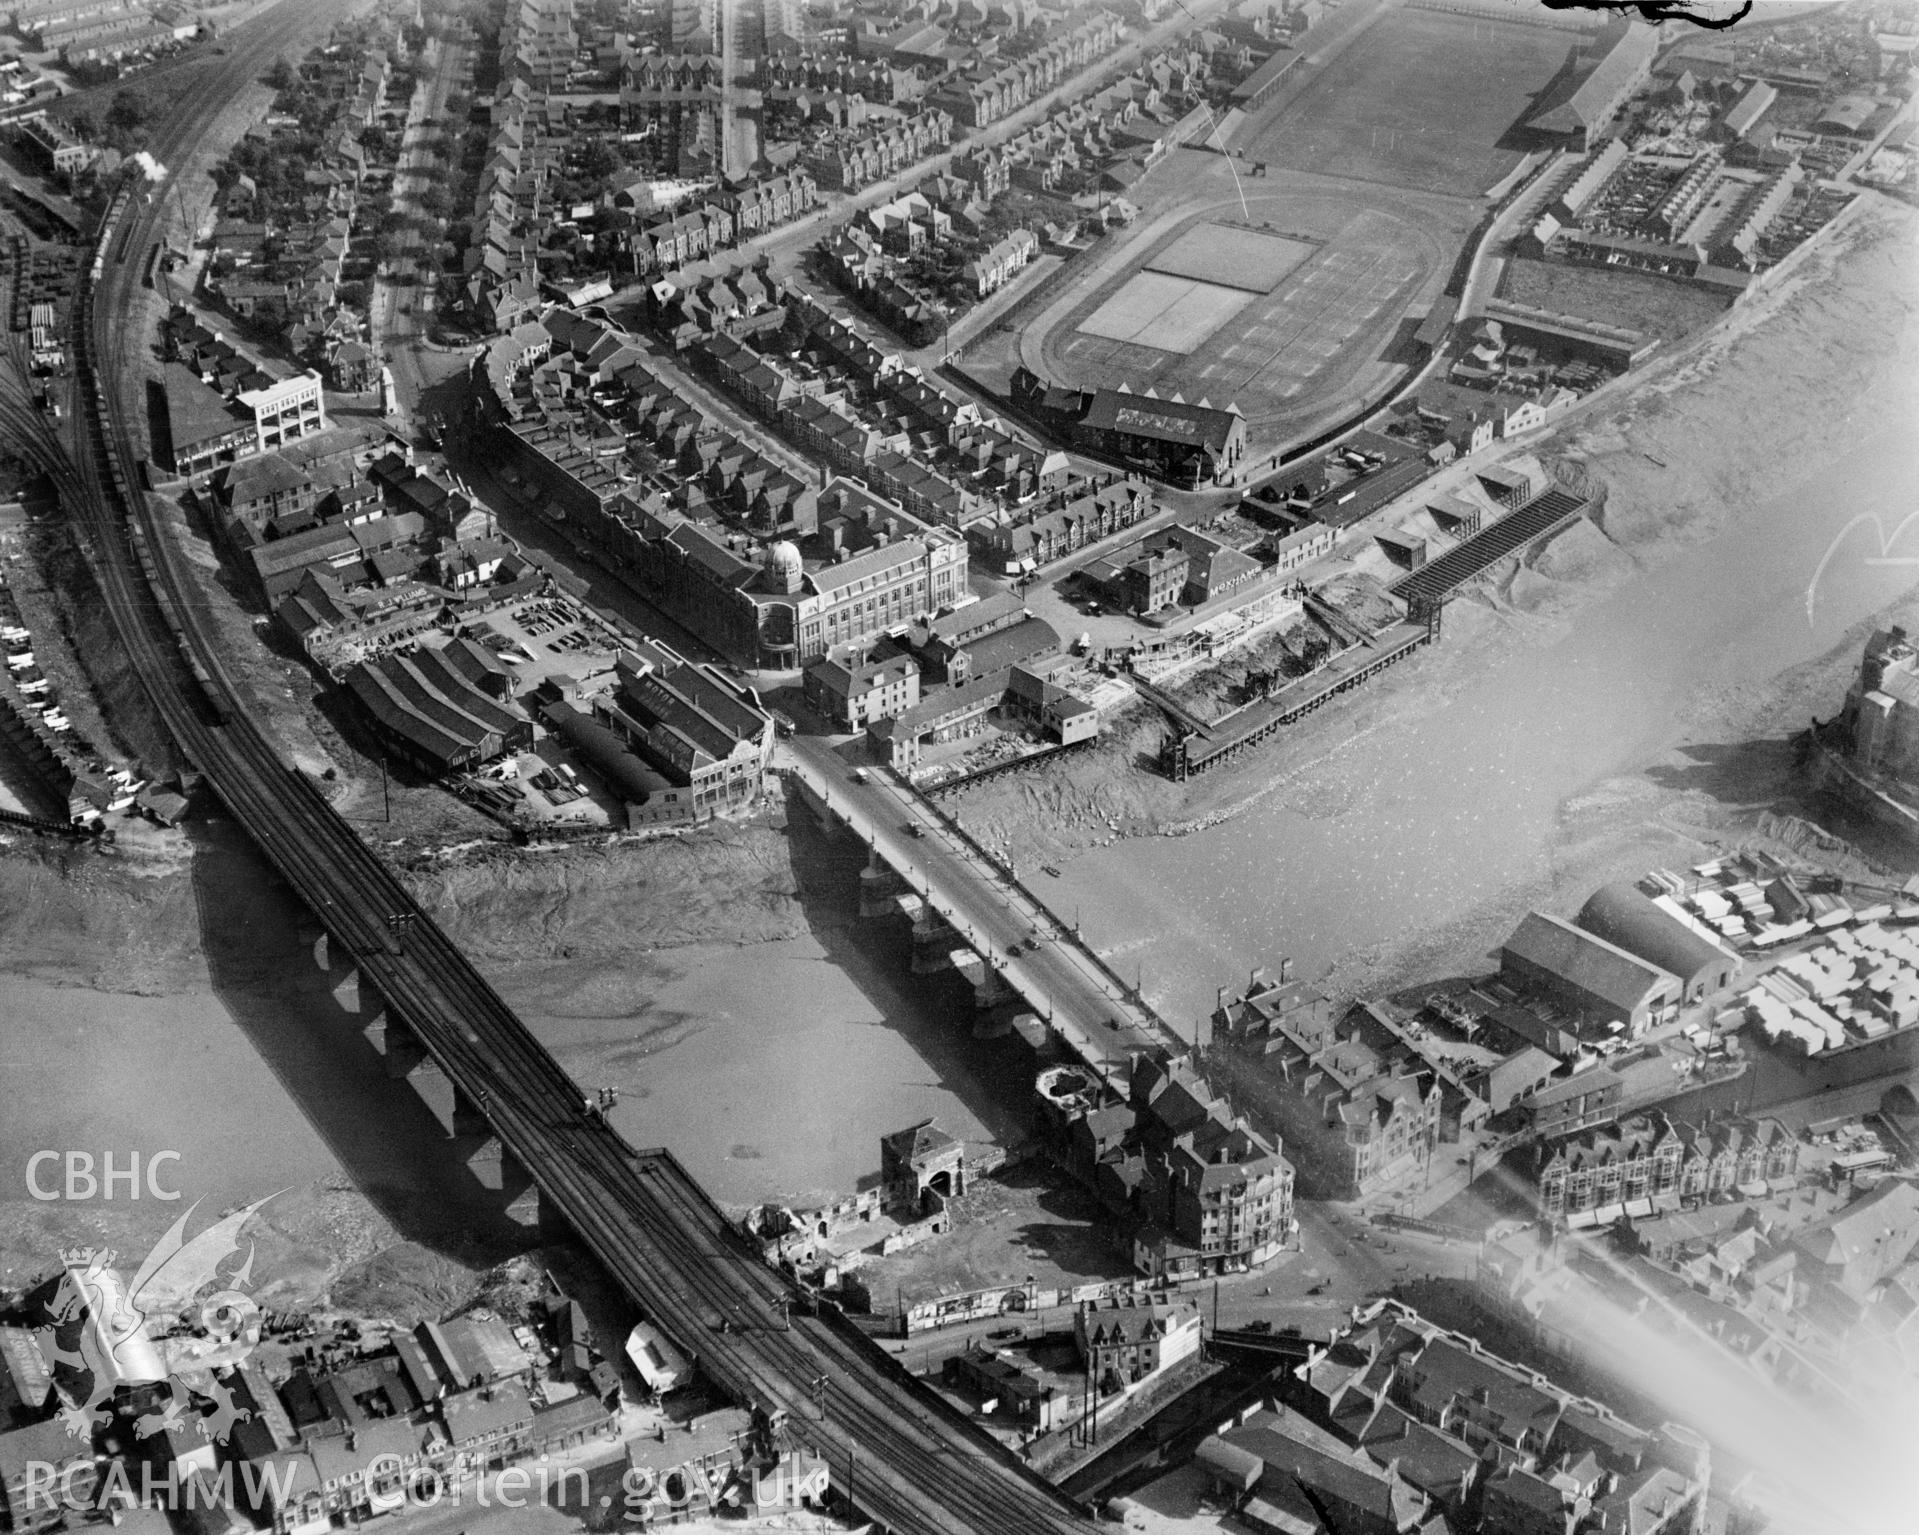 Newport, showing Rodney Parade and bridges, oblique aerial view. 5?x4? black and white glass plate negative.